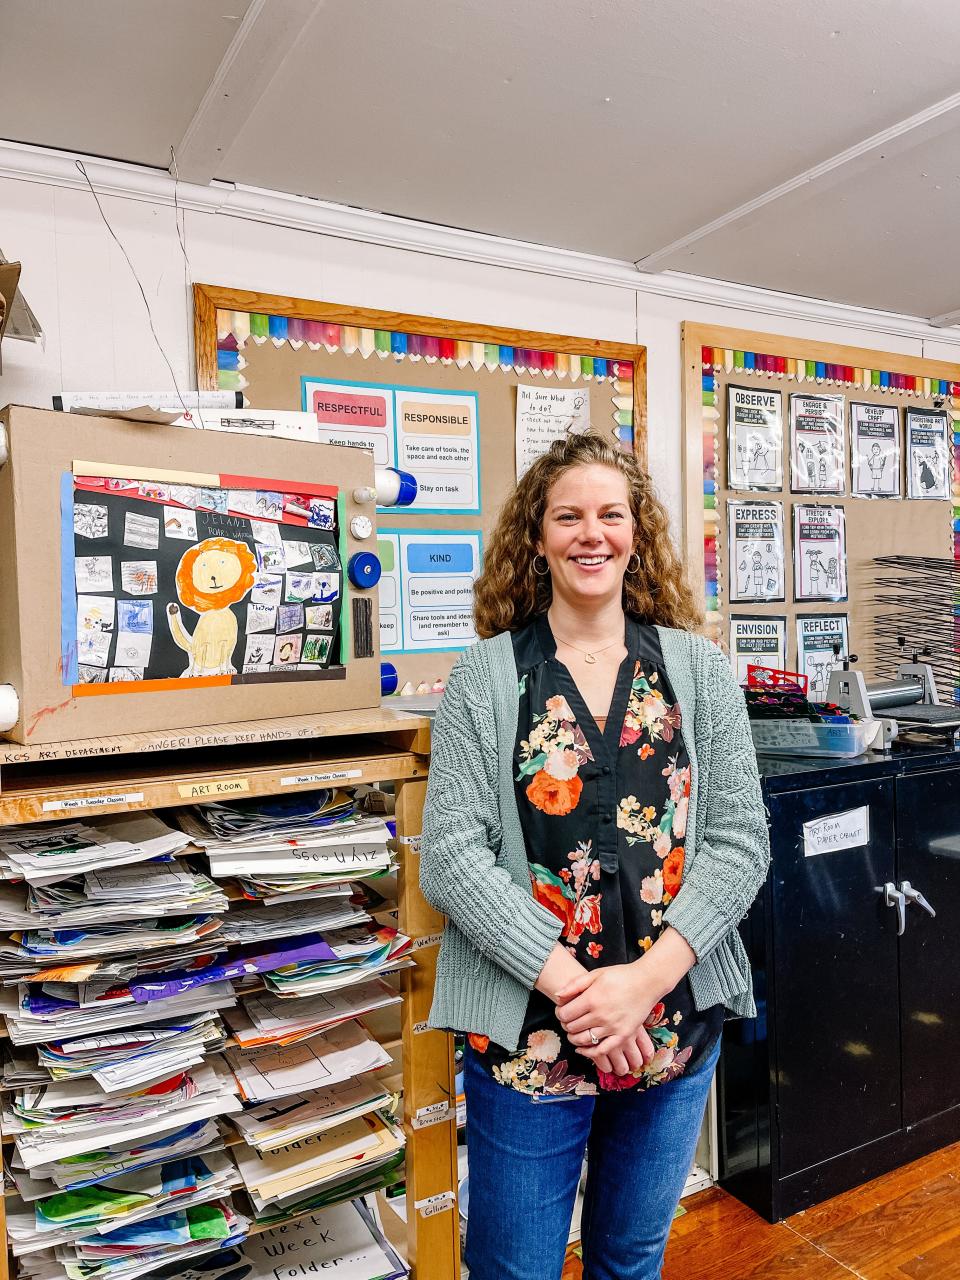 Jessica Gosney, Visual Arts teacher at Corryton Elementary School, said the Dogwood Arts Festival art kits for fifth graders “are a way to extend their art experience and supplement what they are doing in the classroom.”